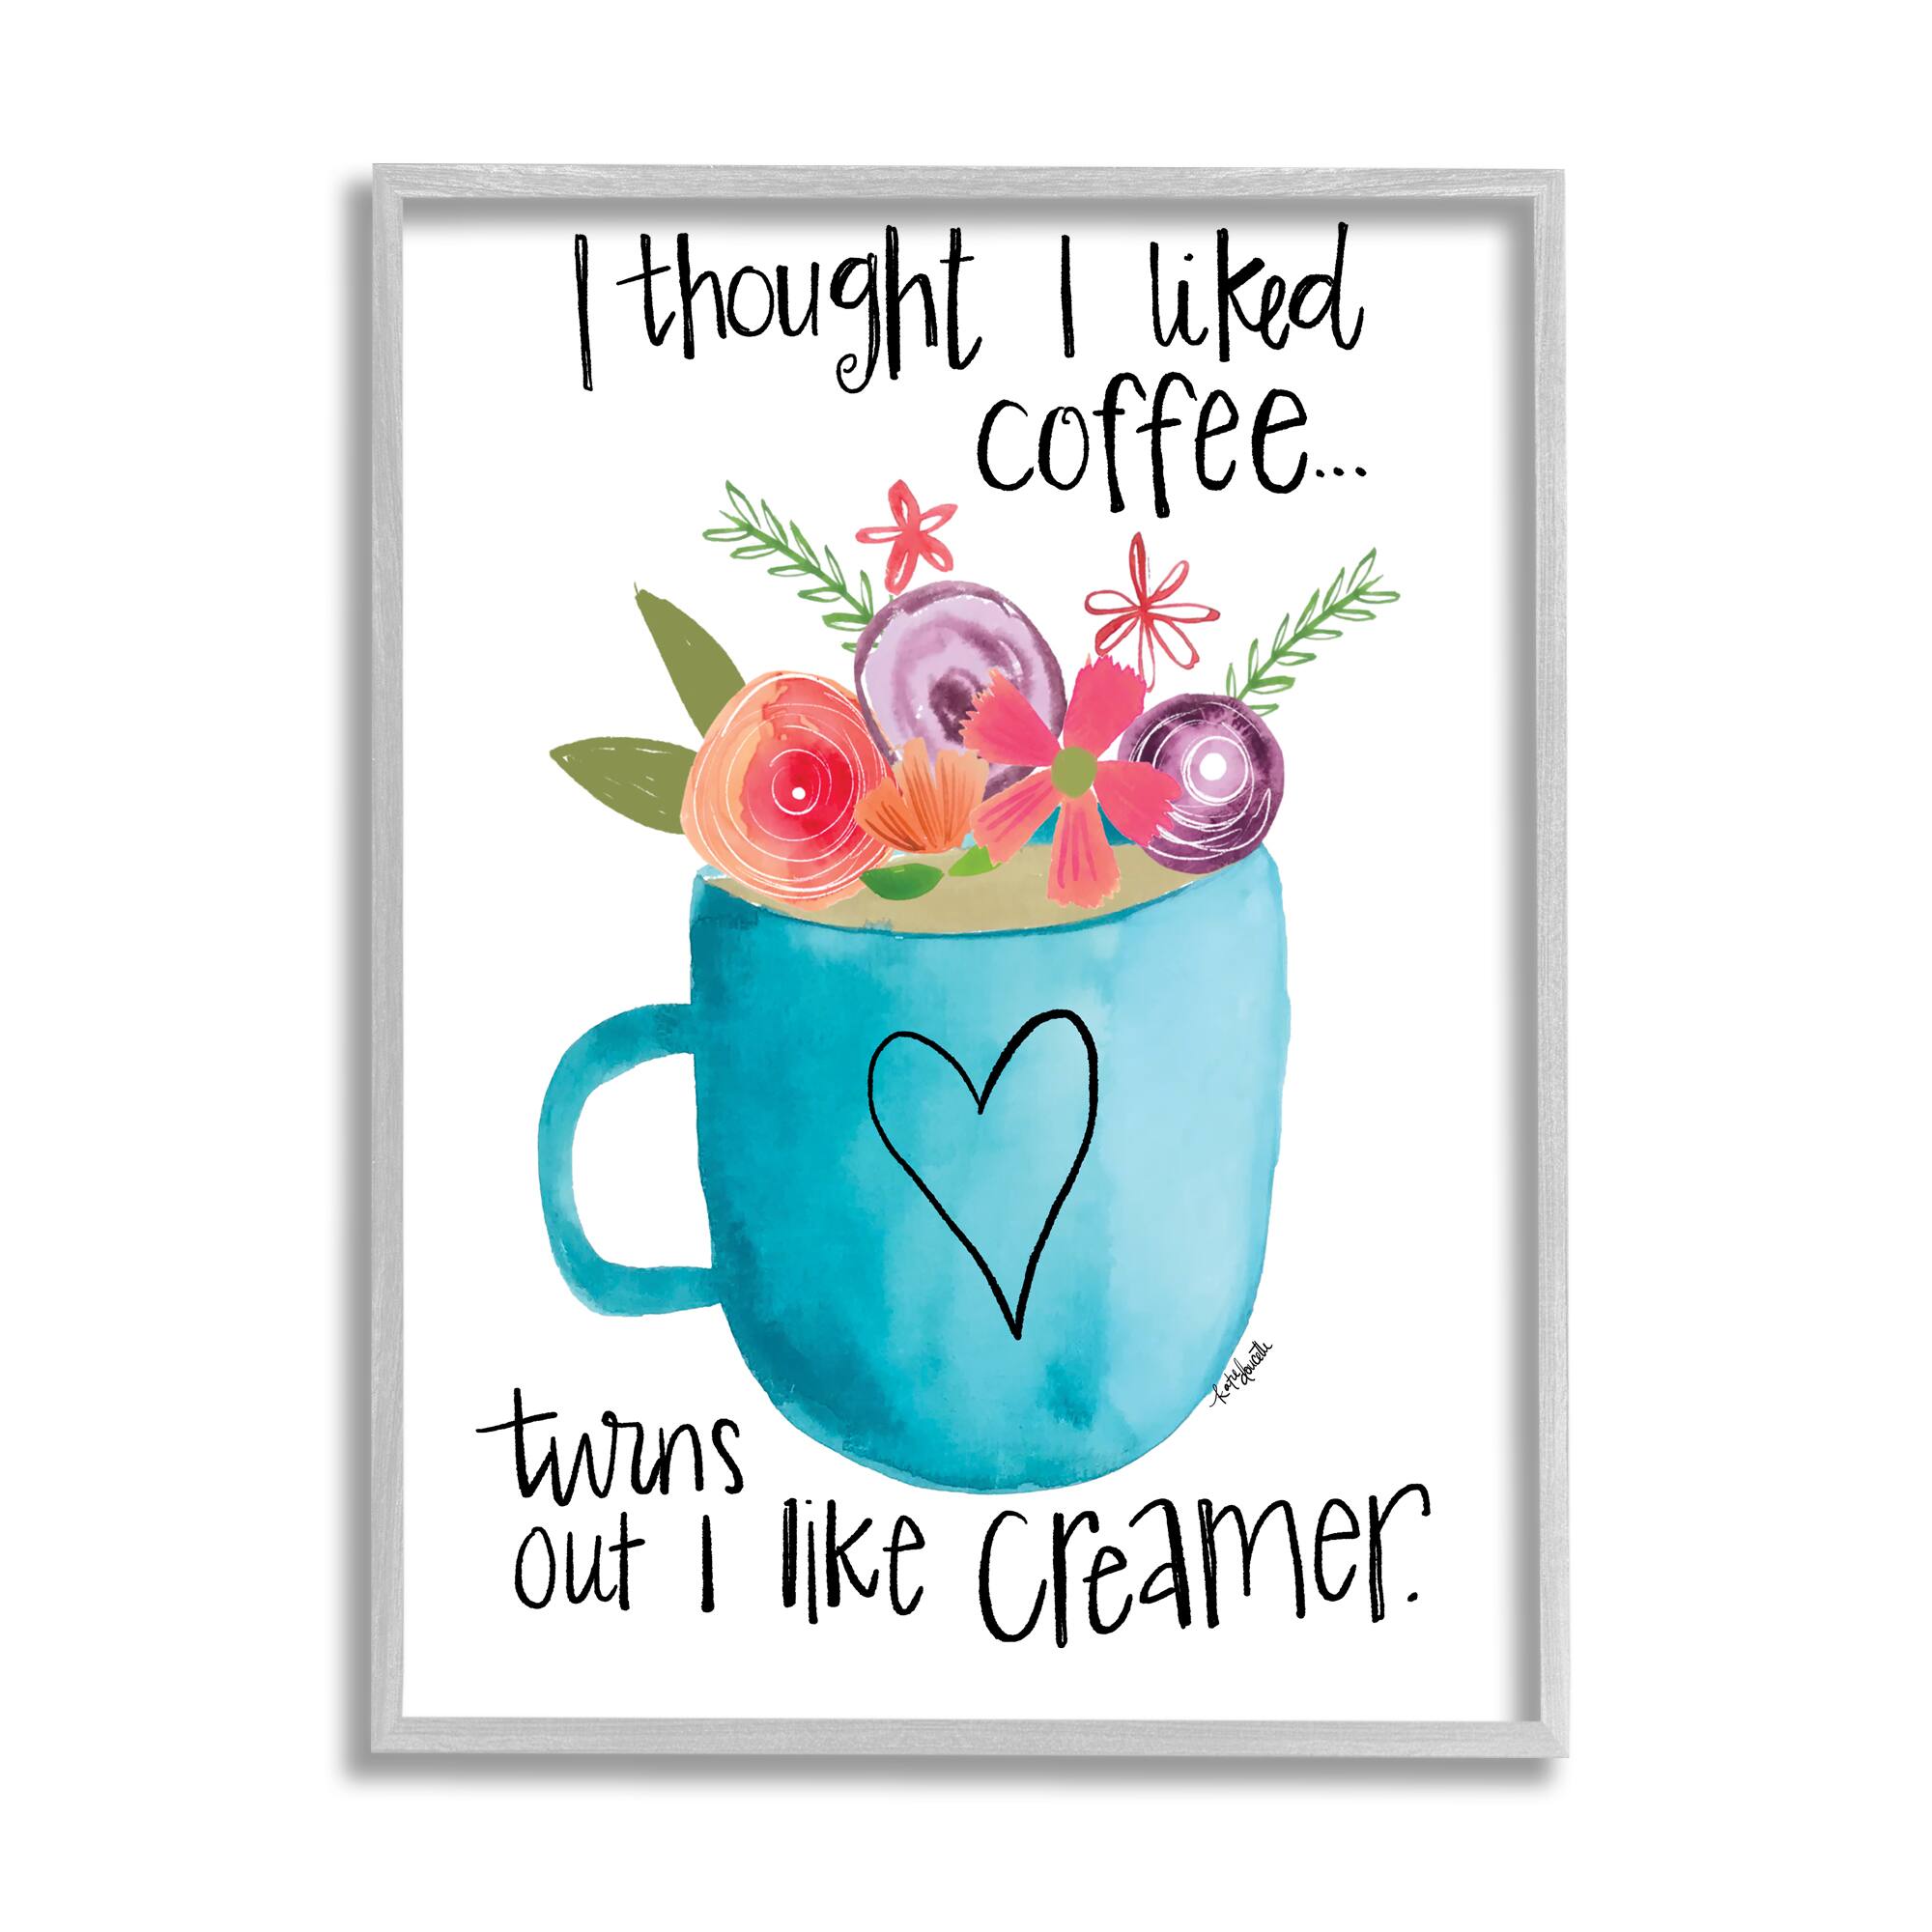 Stupell Industries Thought I Liked Coffee Phrase Kitchen Creamer Joke in Gray Frame Wall Art